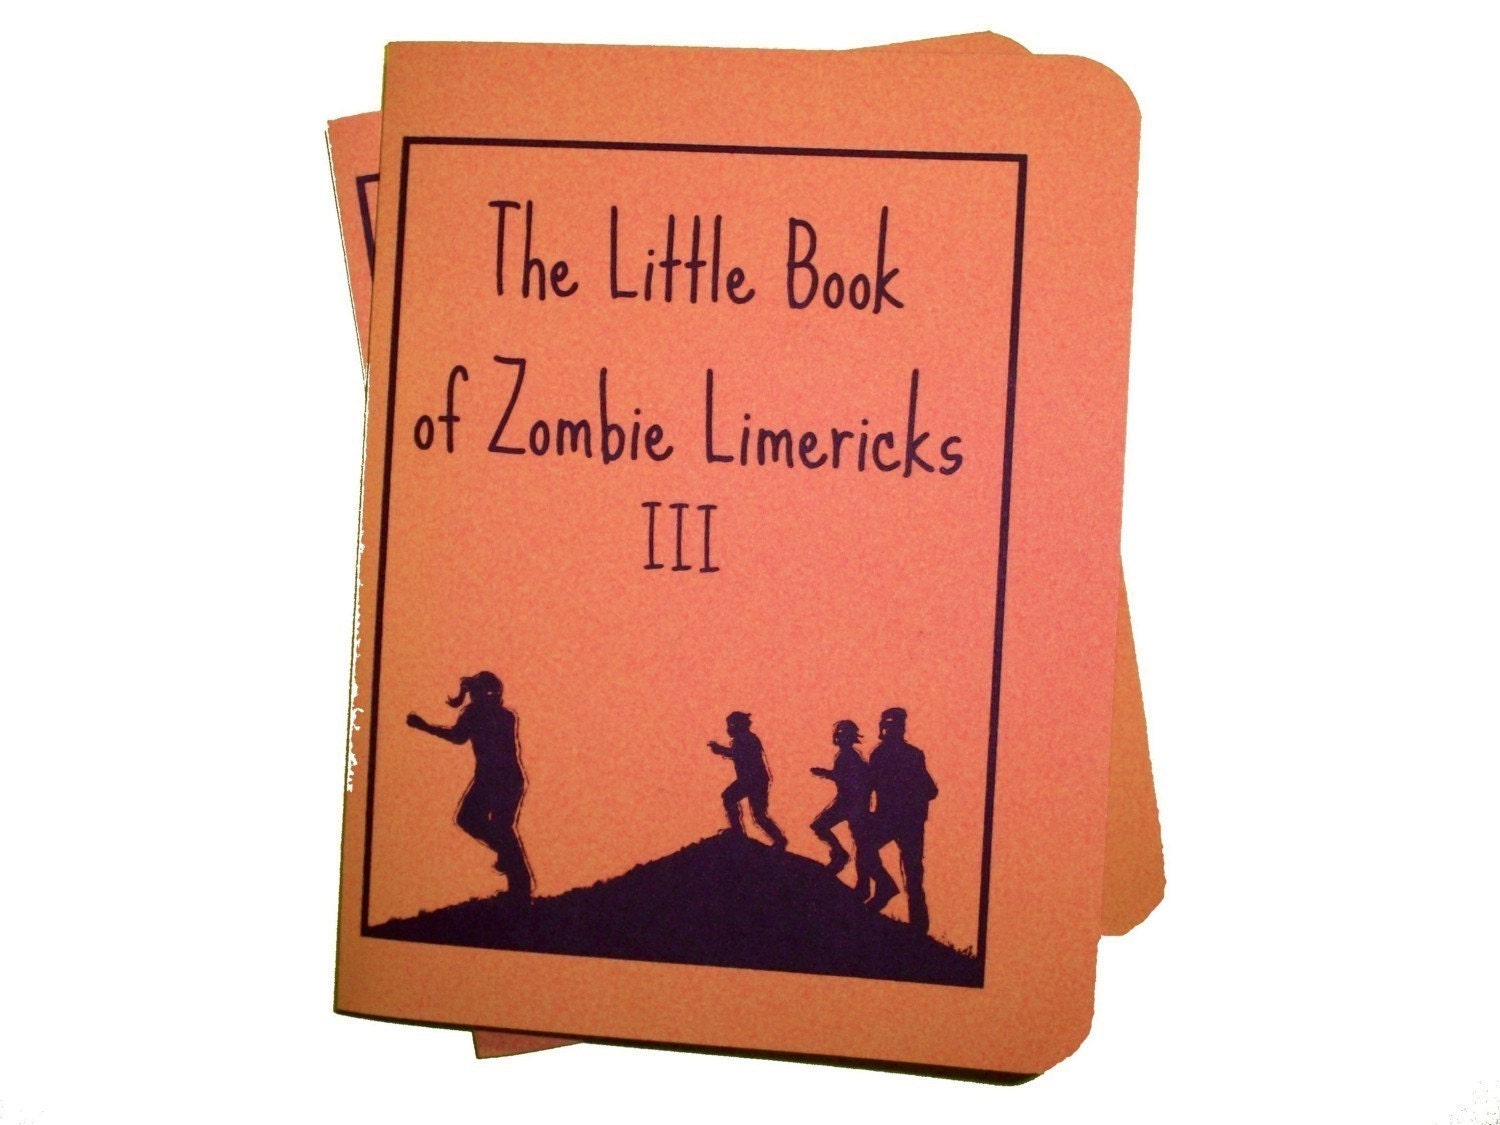 limericks funny. Zombie Limericks volume 3 hand bound funny dark book zine poems illustrations reading art living dead zombies unique greeting card. From zombietoes